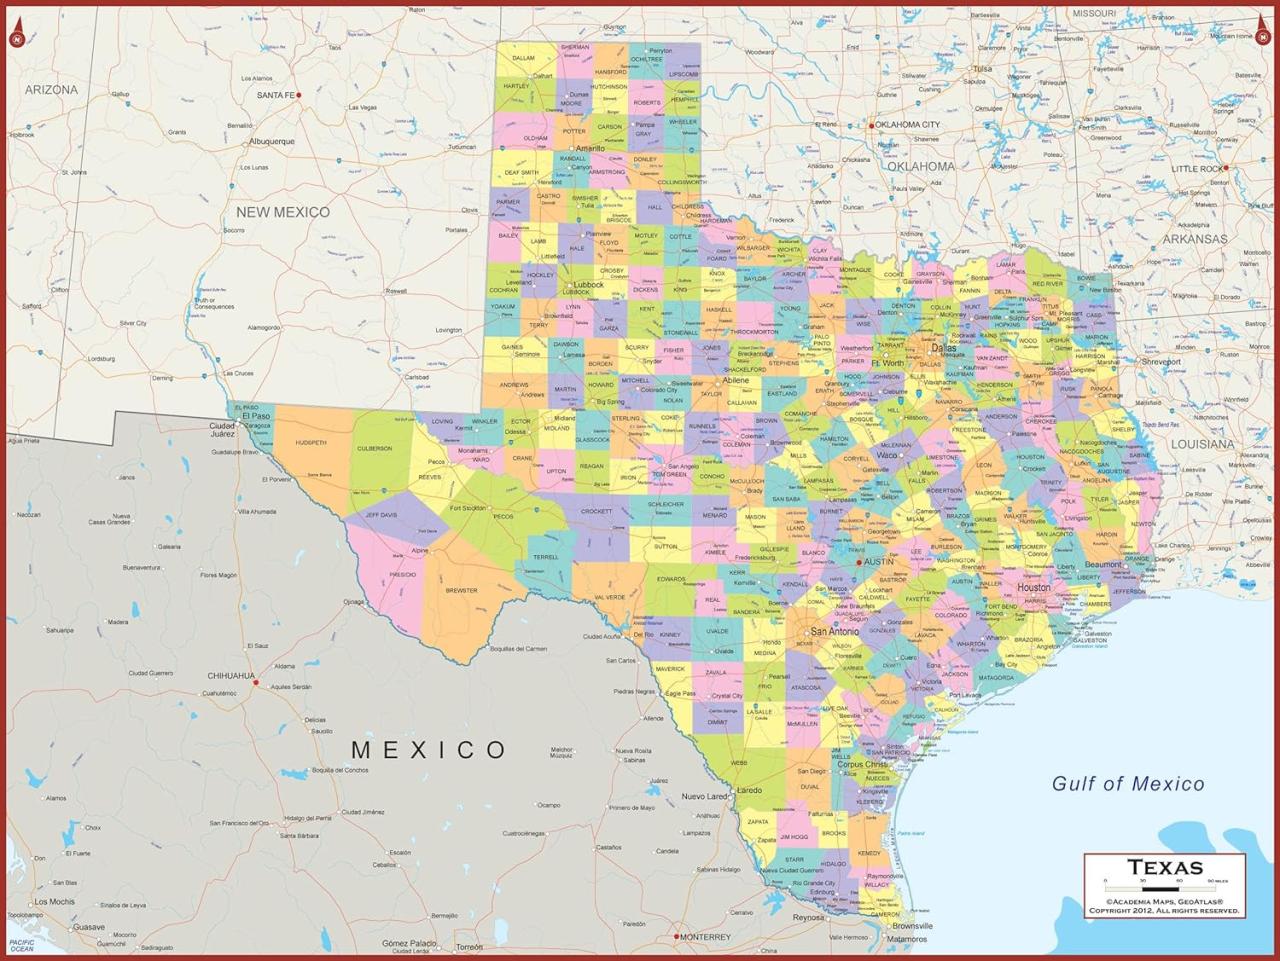 Amazon.com : 54 x 41 Large Texas State Wall Map Poster with Counties - Classroom Style Map with